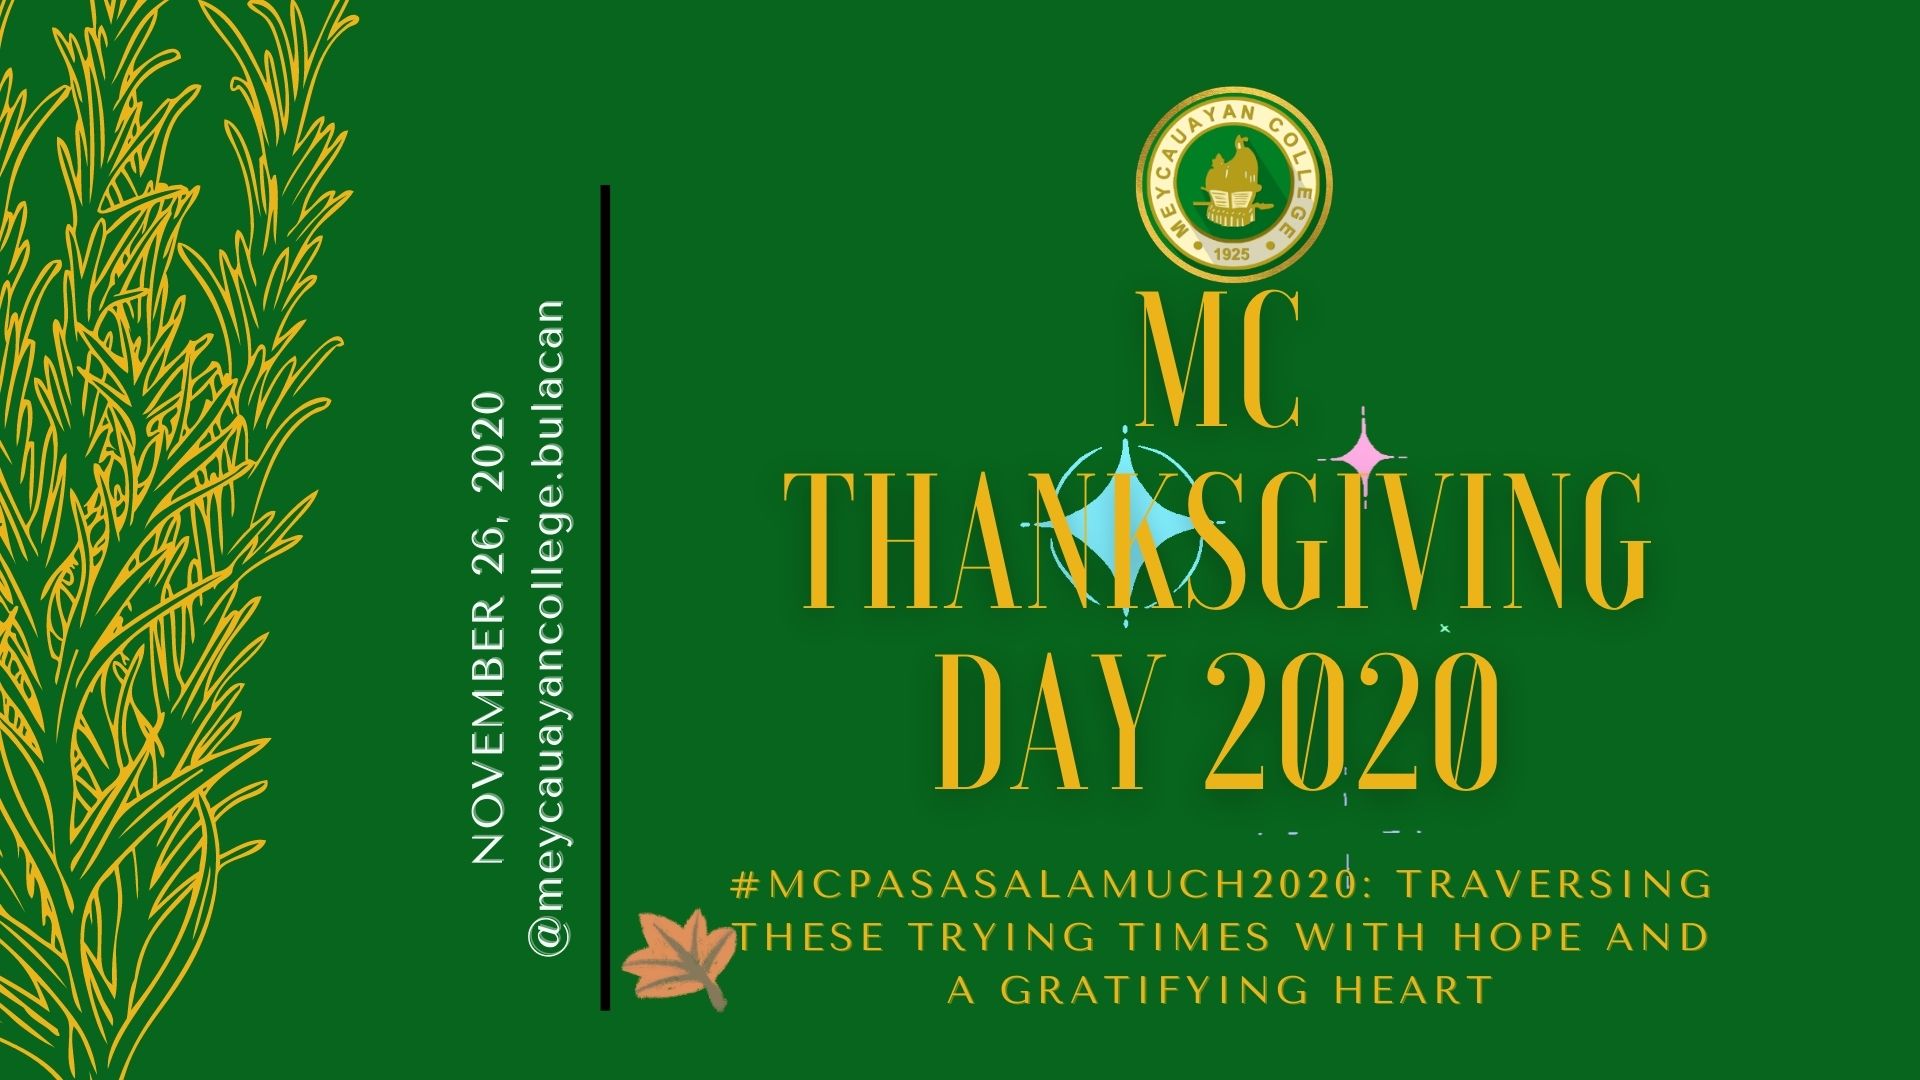 Send hope and gratitude in this year’s MC Thanksgiving Day